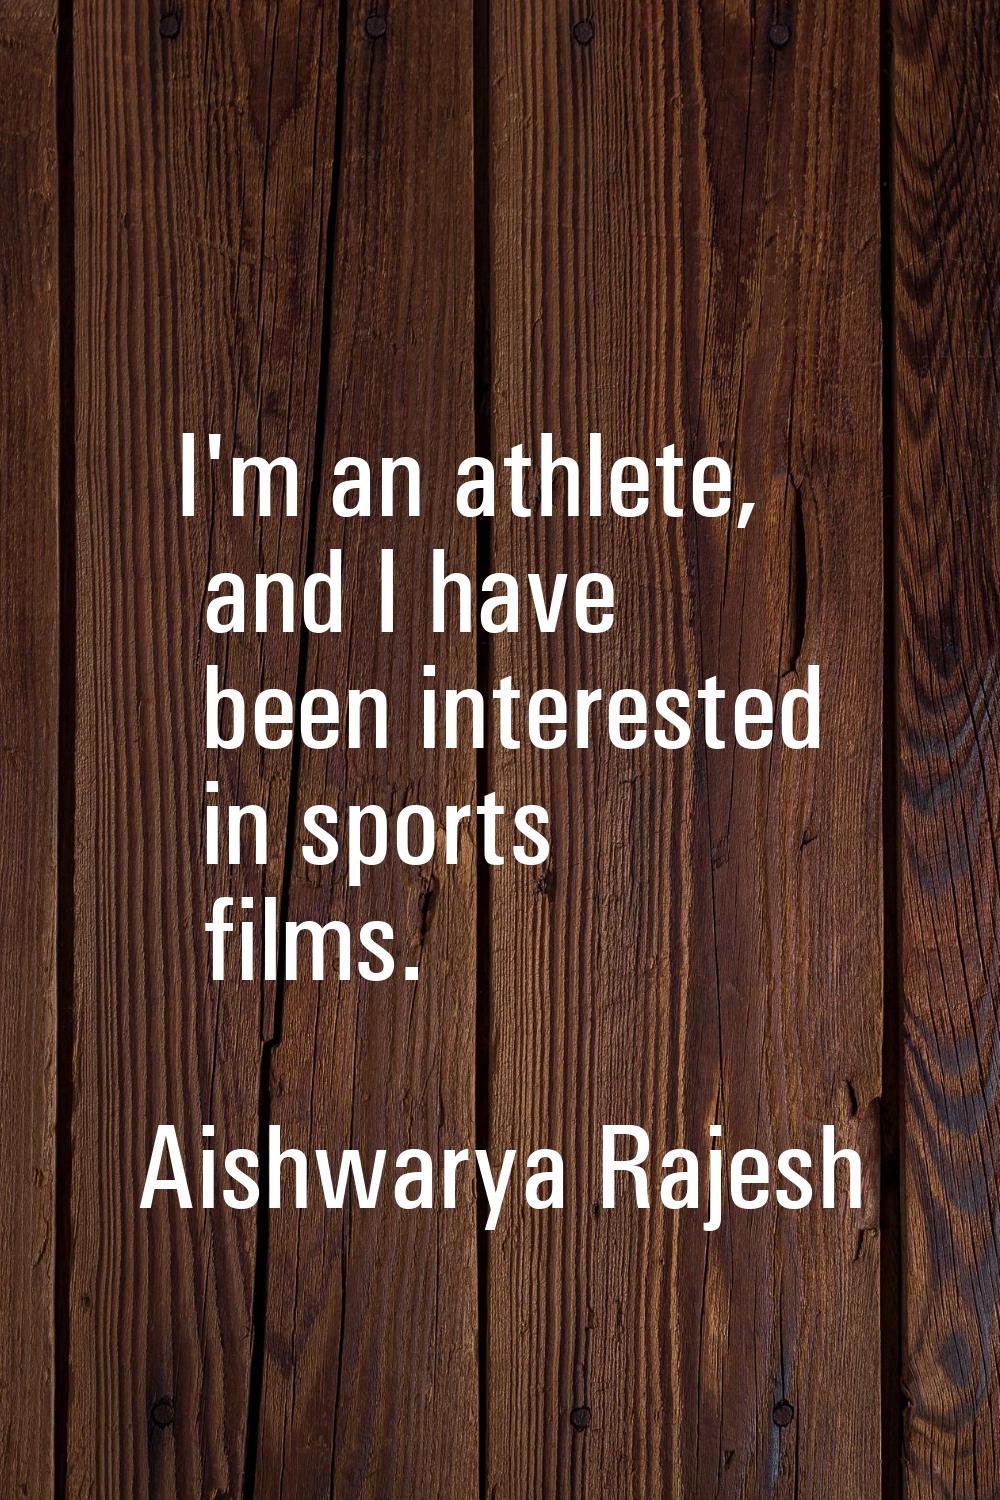 I'm an athlete, and I have been interested in sports films.